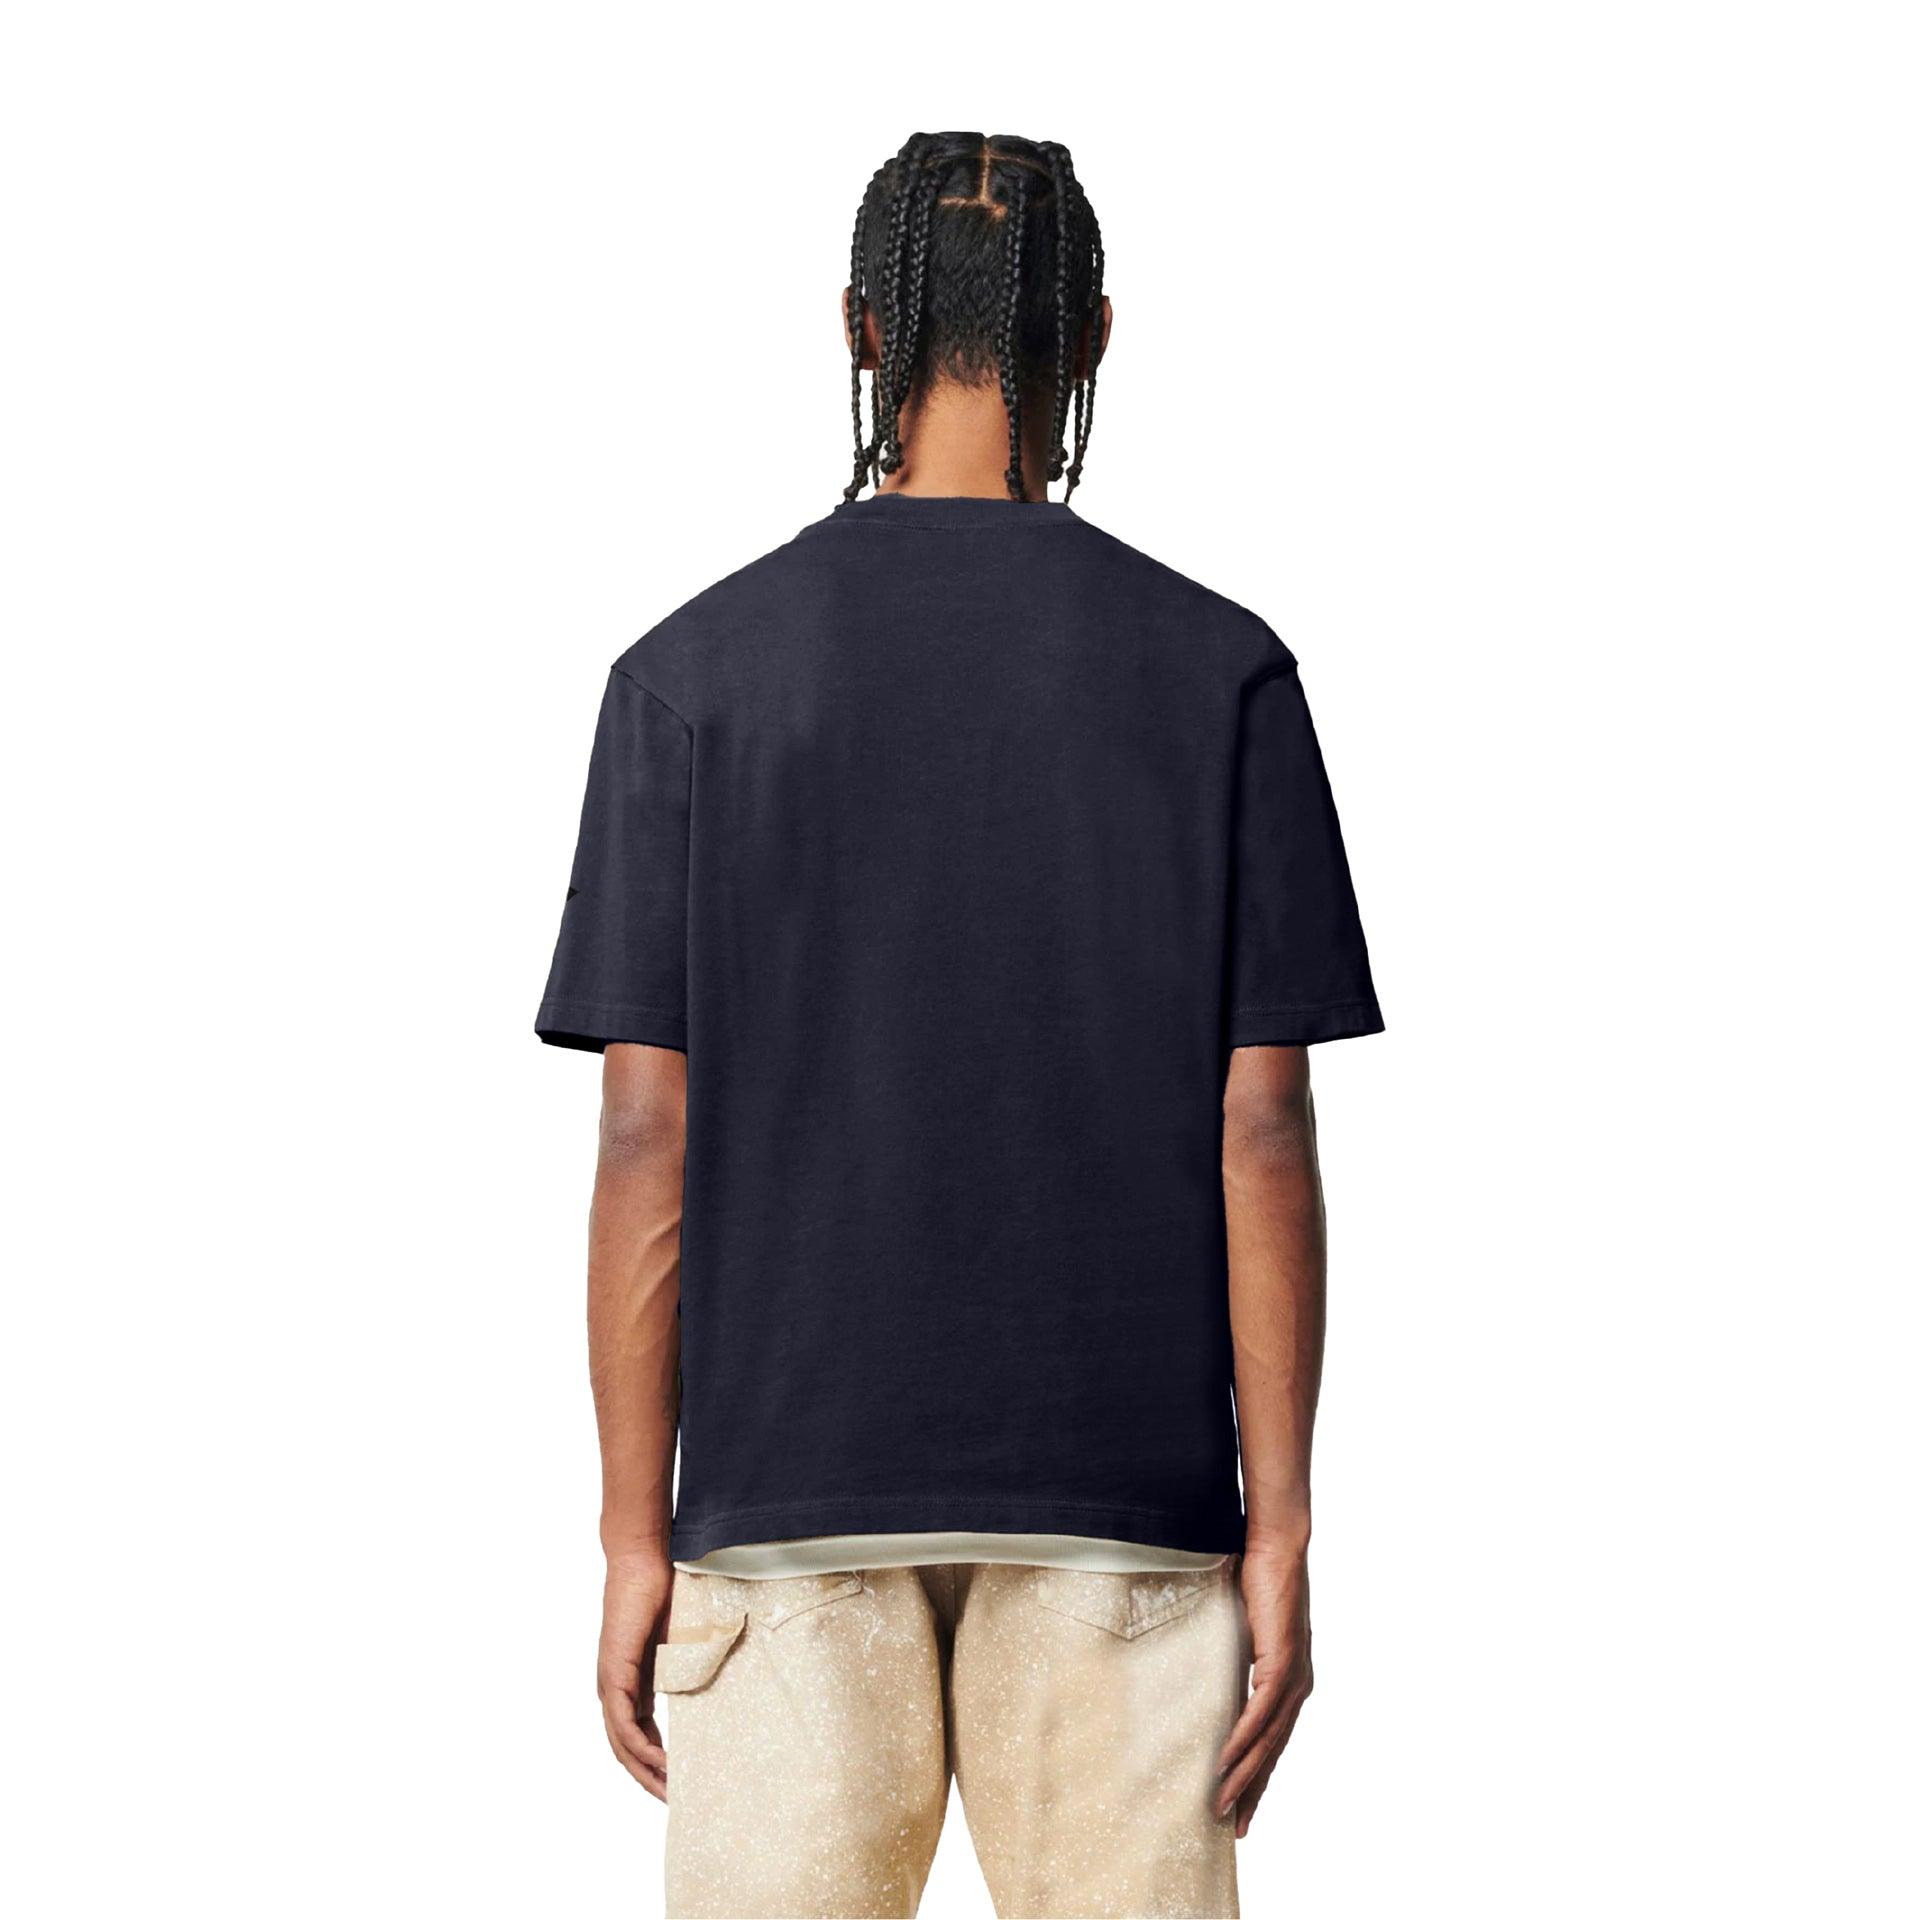 Navy Speedhunters T-shirt From I'm West - WECRE8